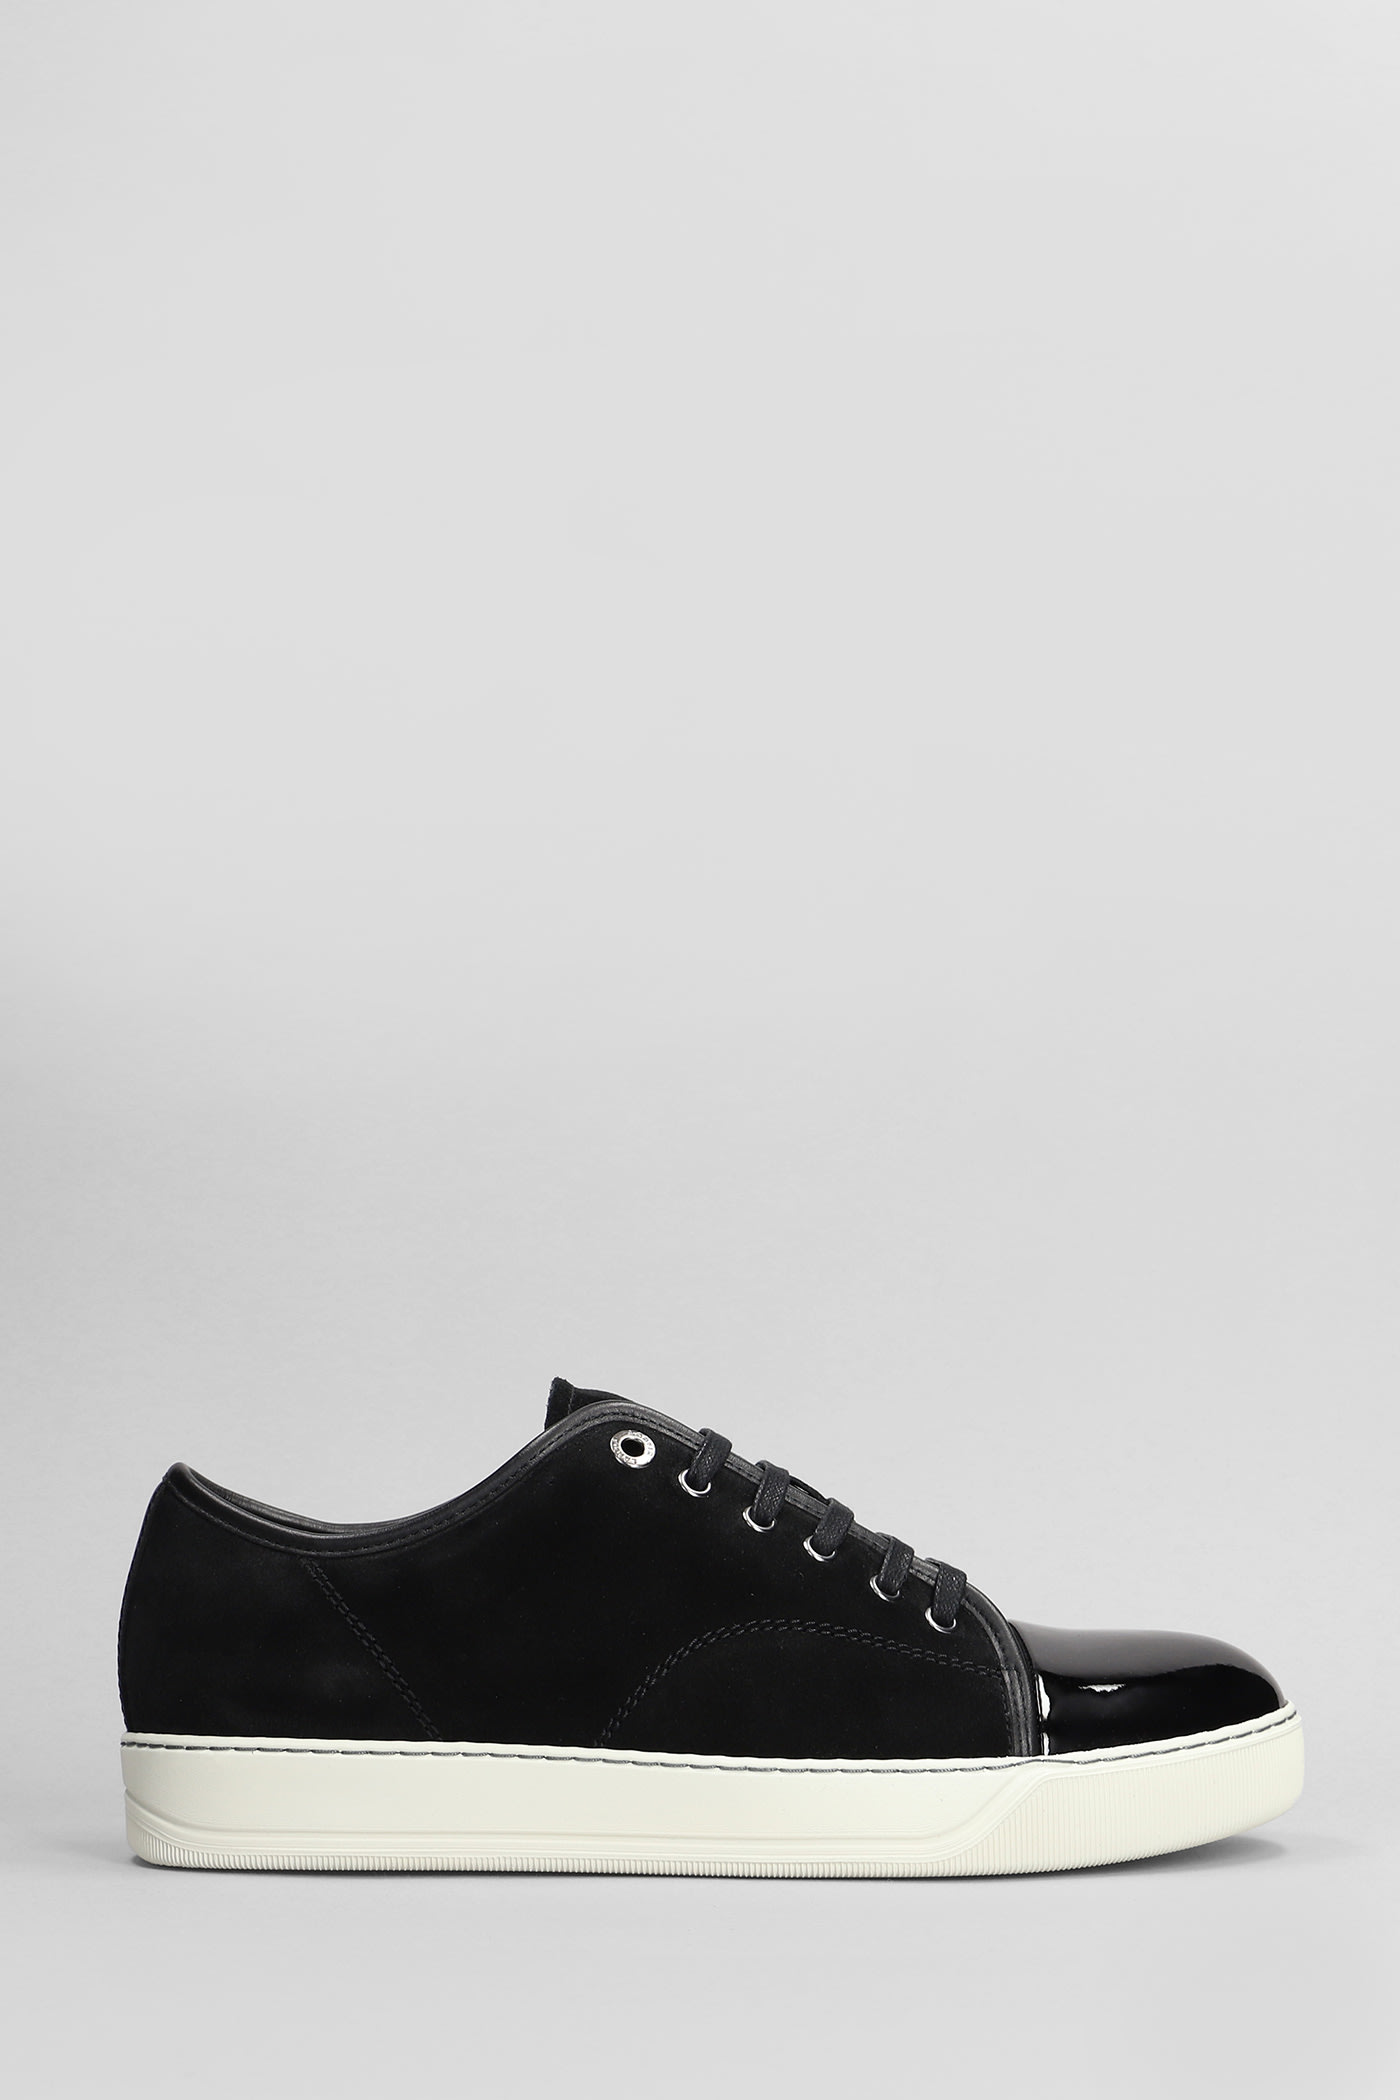 Shop Lanvin Dbb1 Sneakers In Black Suede And Leather